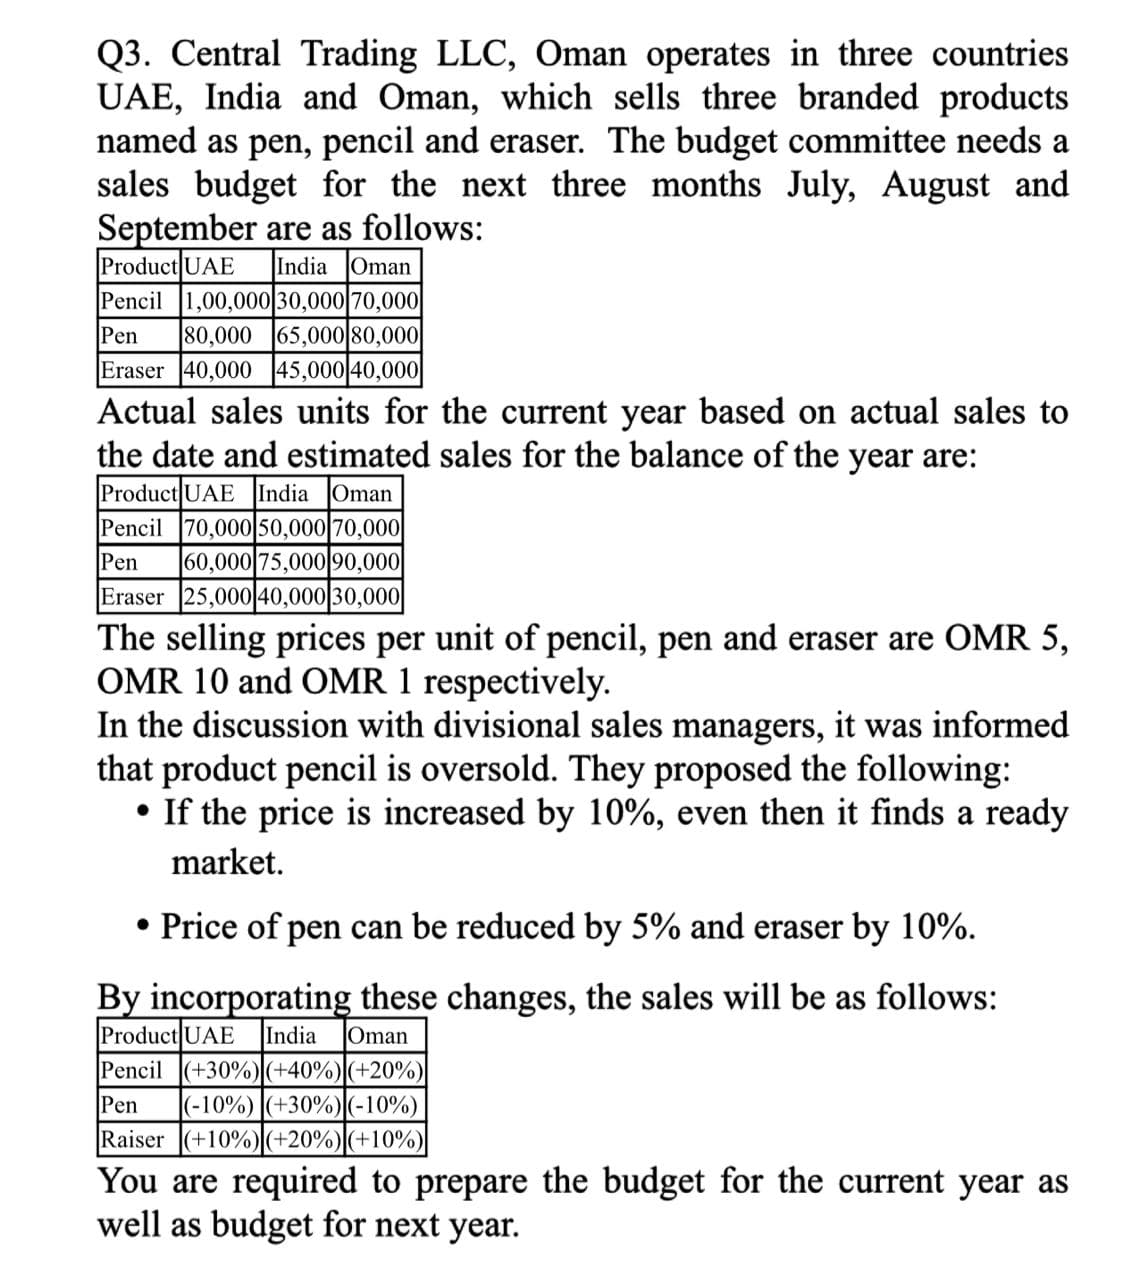 Q3. Central Trading LLC, Oman operates in three countries
UAE, India and Oman, which sells three branded products
named as pen, pencil and eraser. The budget committee needs a
sales budget for the next three months July, August and
September are as follows:
Product UAE
Pencil 1,00,000|30,000 70,000|
80,000 65,000|80,000
Eraser 40,000 45,000 40,000
India Oman
Pen
Actual sales units for the current year based on actual sales to
the date and estimated sales for the balance of the year are:
Product UAE India Oman
Pencil 70,000 50,000 70,000
60,000 75,00090,000
Eraser 25,000 40,000 30,000
Pen
The selling prices per unit of pencil, pen and eraser are OMR 5,
OMR 10 and OMR 1 respectively.
In the discussion with divisional sales managers, it was informed
that product pencil is oversold. They proposed the following:
• If the price is increased by 10%, even then it finds a ready
market.
• Price of pen can be reduced by 5% and eraser by 10%.
By incorporating these changes, the sales will be as follows:
Product UAE
India
Oman
Pencil (+30%)(+40%)(+20%)
|(-10%) (+30%)(-10%)
Raiser (+10%)(+20%)(+10%)
Pen
You are required to prepare the budget for the current year as
well as budget for next year.
